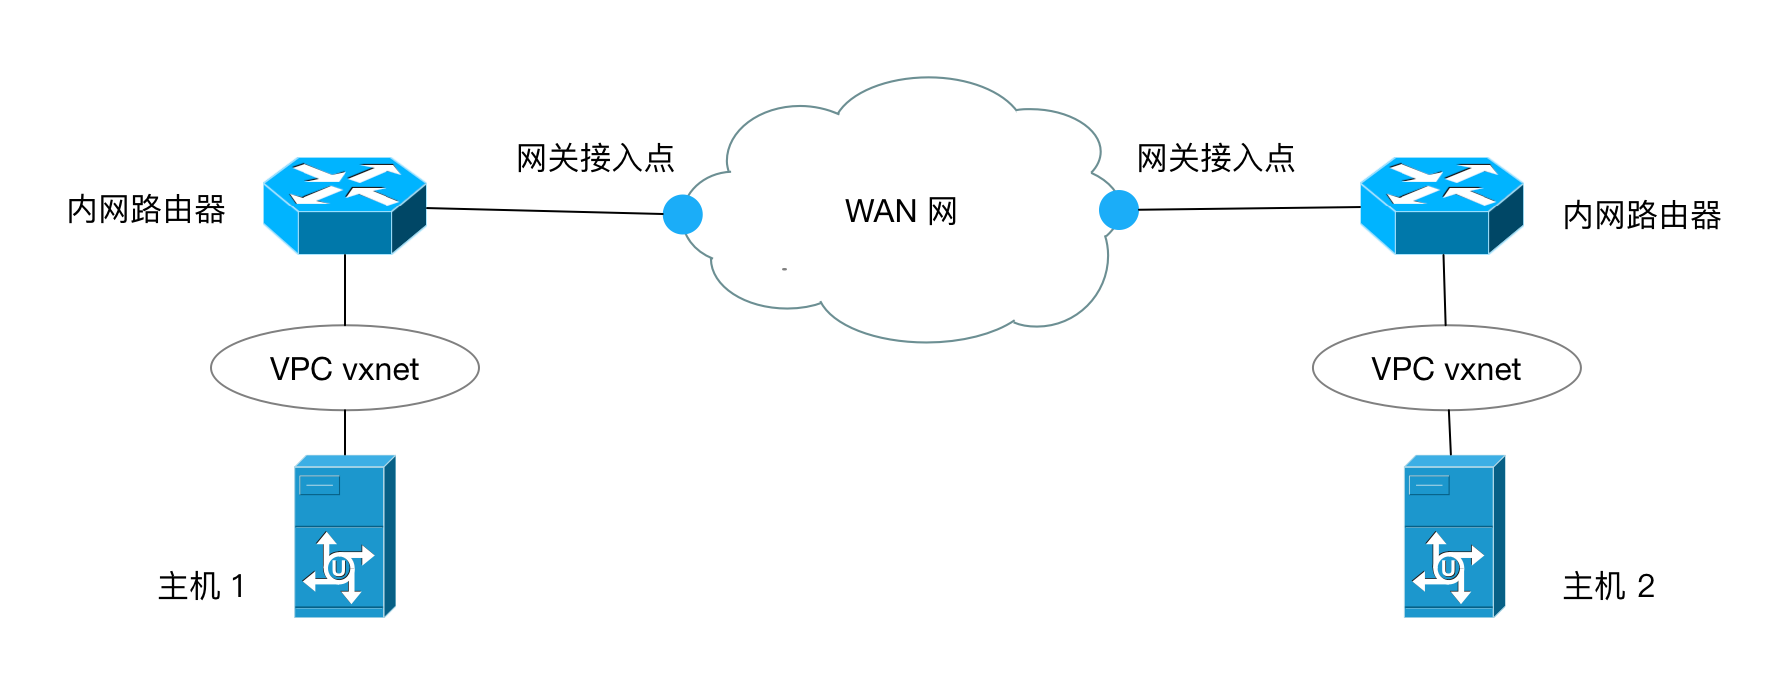 vpc connect vpc topology